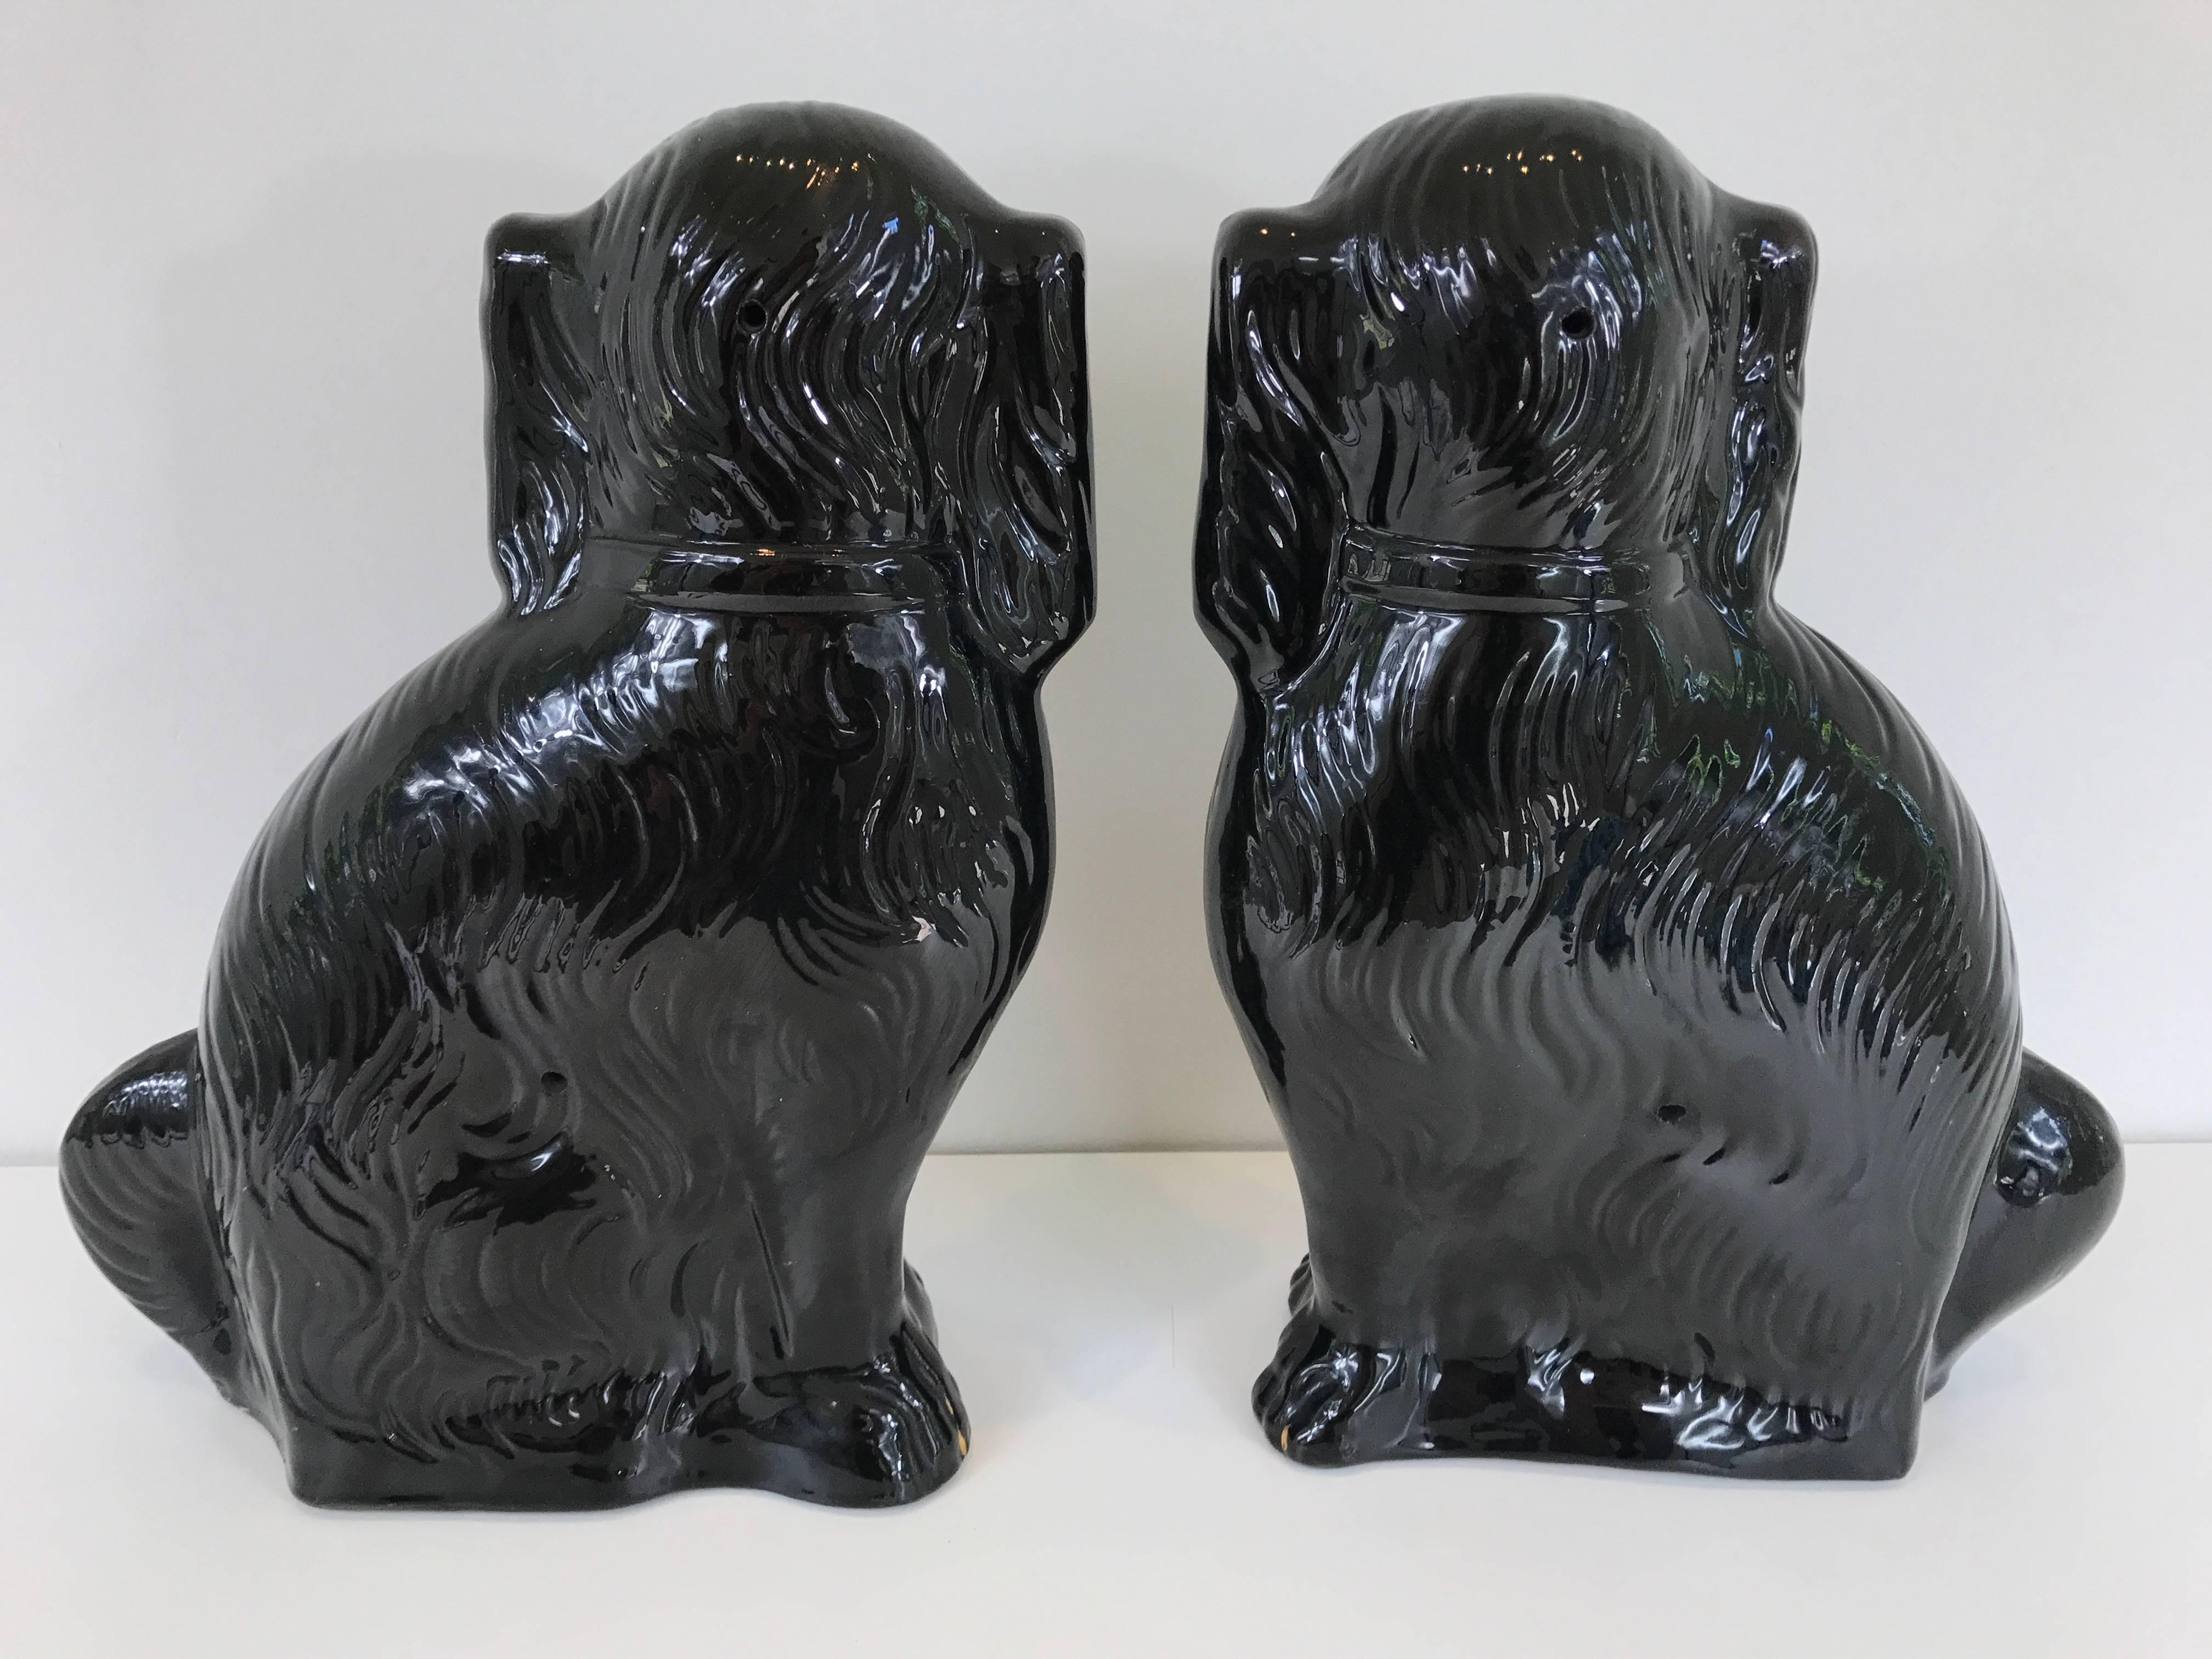 English Pair of Large 19th Century Black Staffordshire Dogs